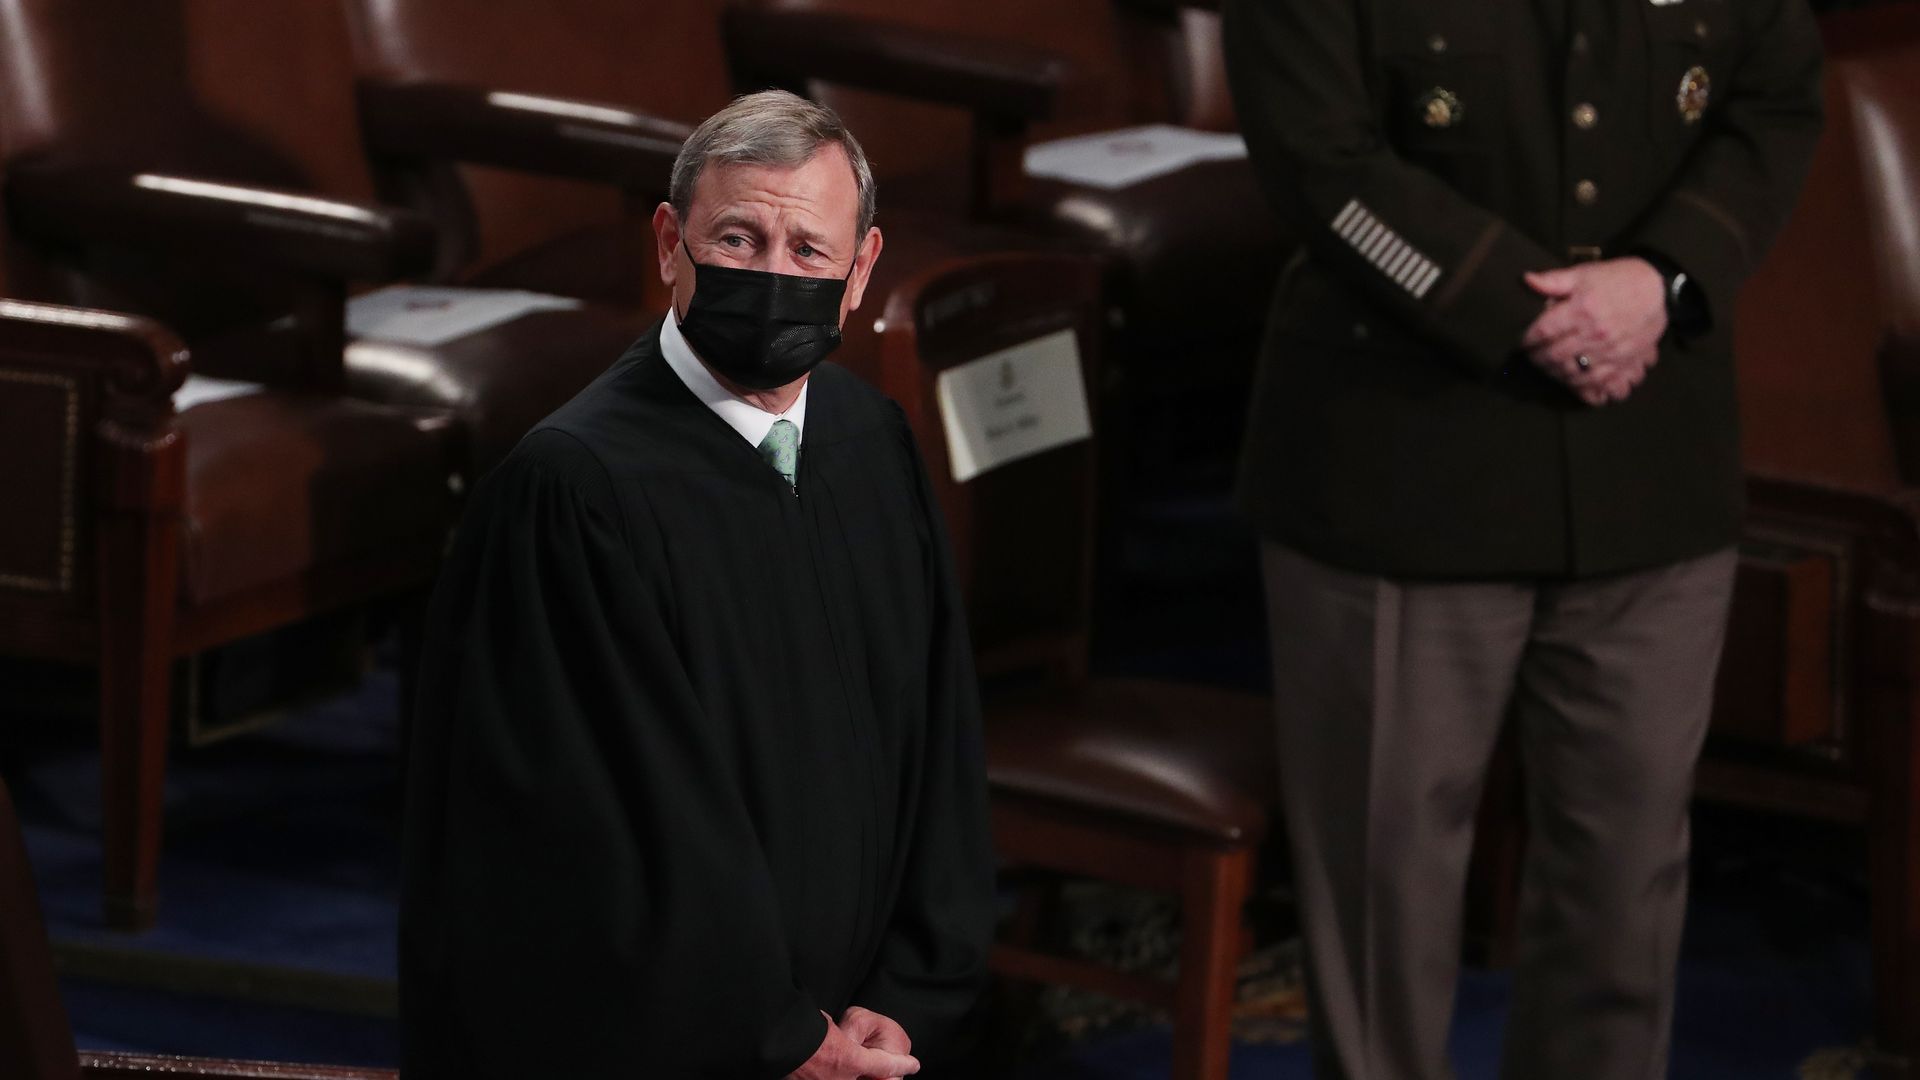 Photo of John Roberts in a mask and his Supreme Court robes while standing in a chamber with hands clasped